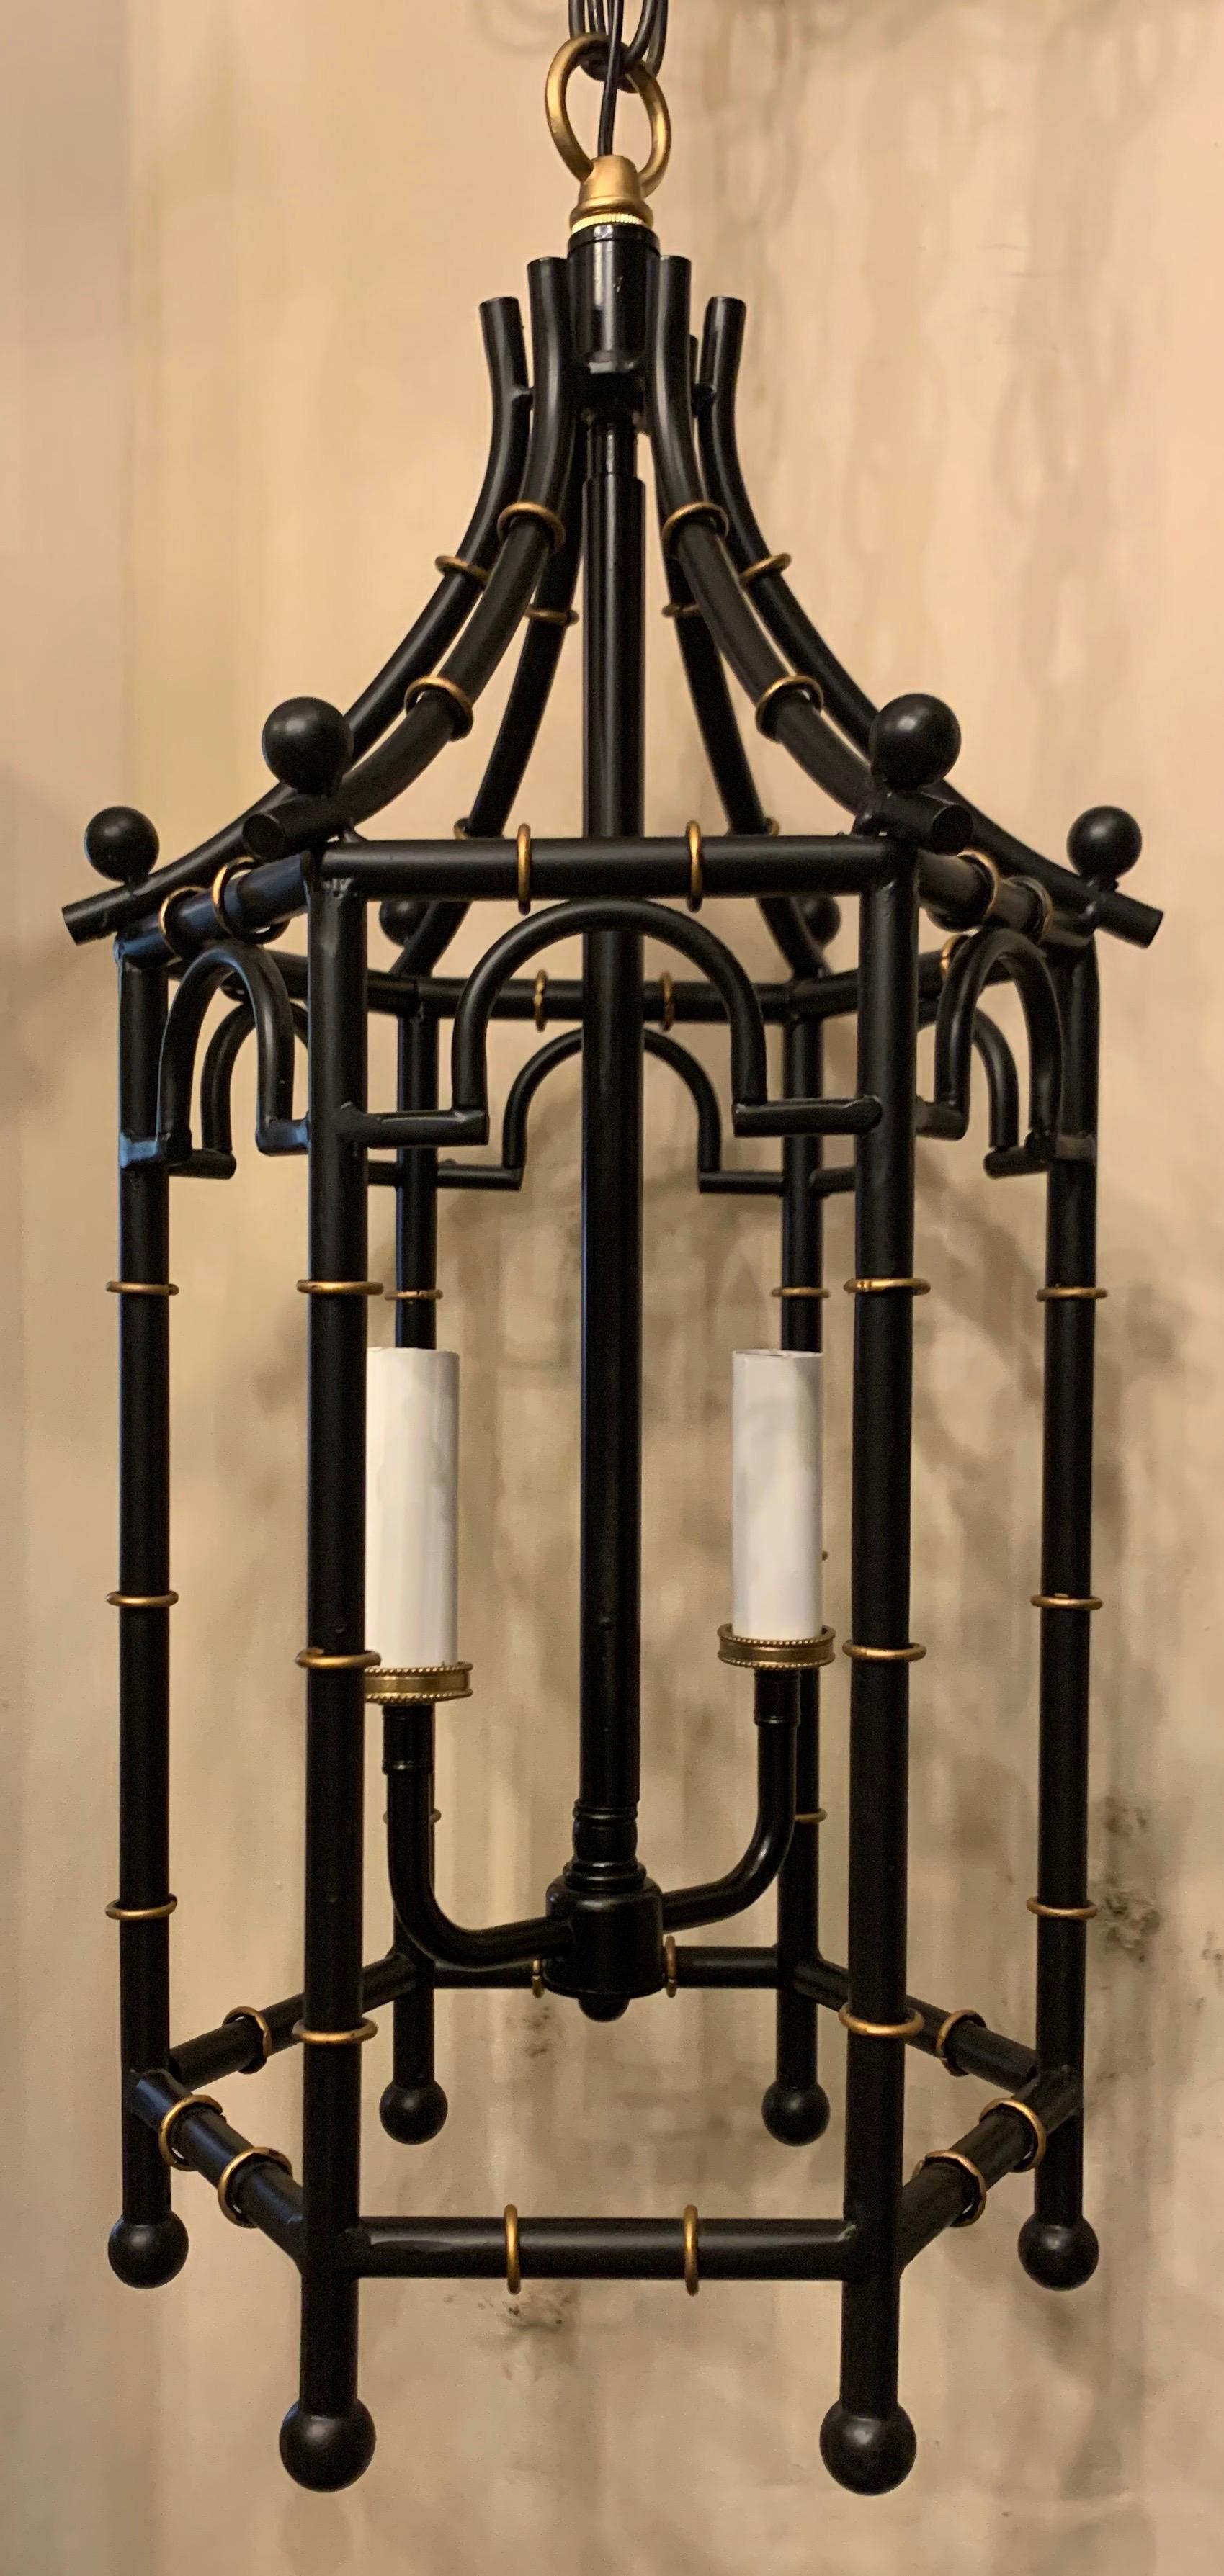 A wonderful vintage pair of black and gold gilt pagoda / bamboo chinoiserie 2-light lantern light fixtures in the manner of Maison Jansen, both fixtures have been completely rewired and are accompanied by chain canopy and mounting hardware.